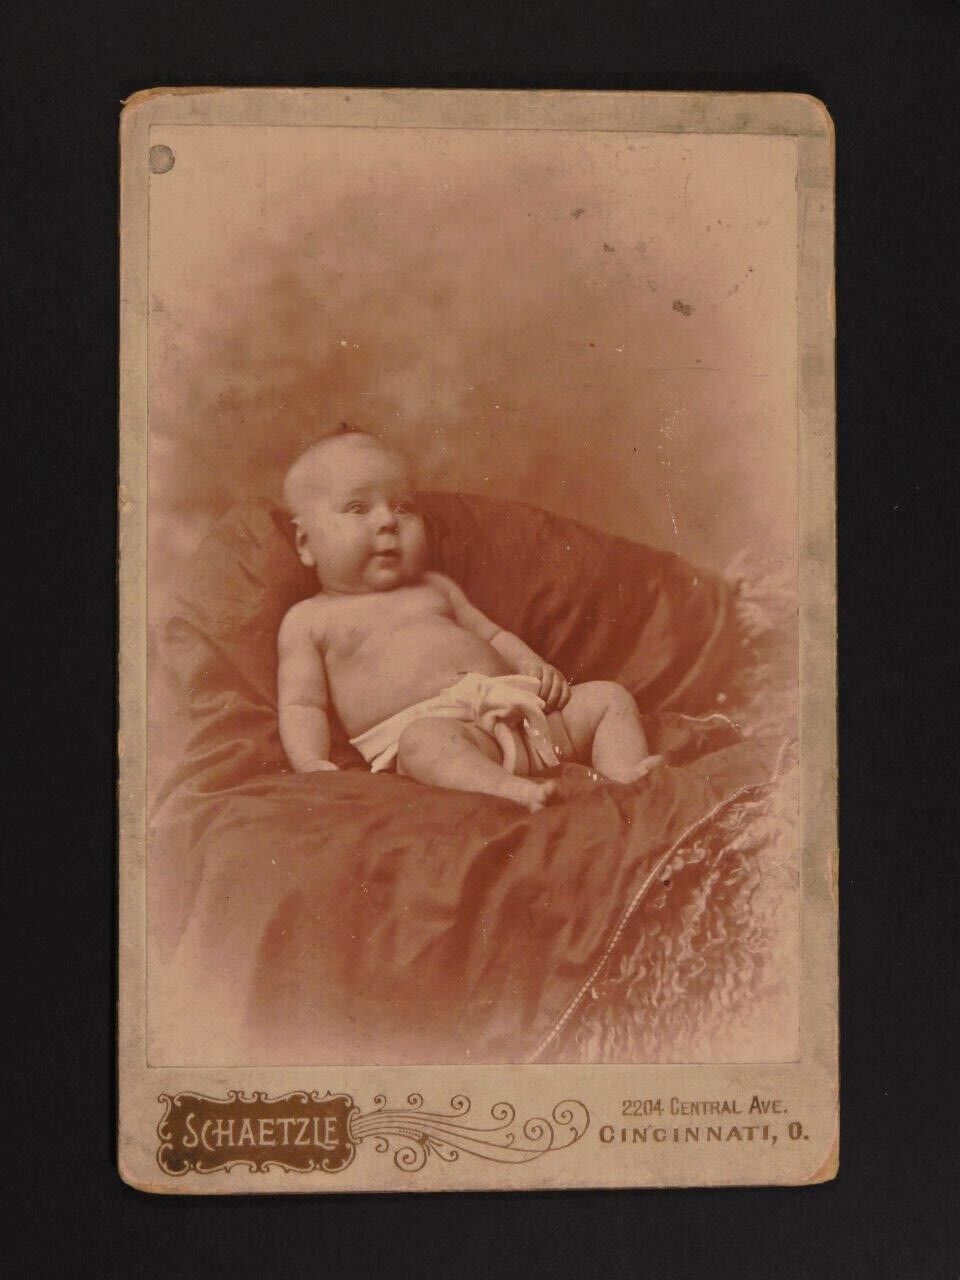 Vintage black & white photograph of baby